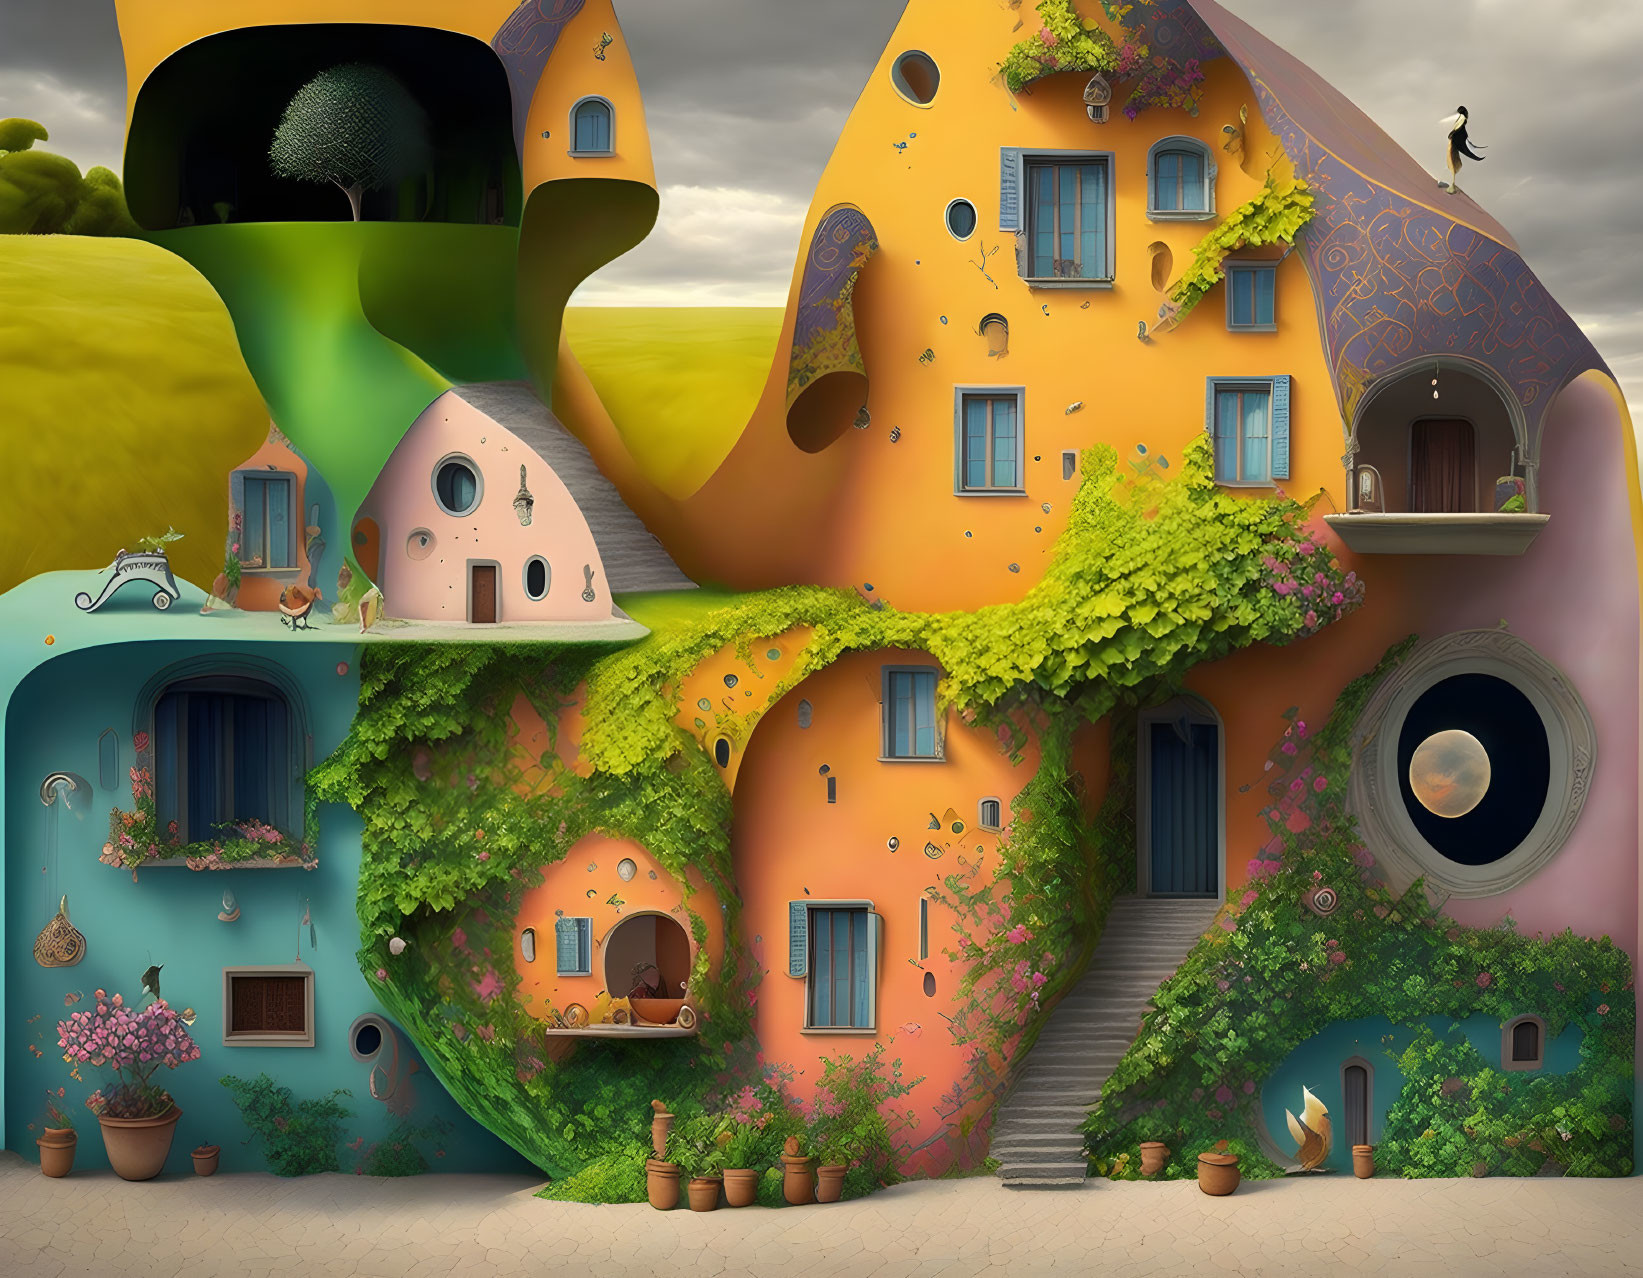 Surreal colorful houses in whimsical landscape with organic shapes